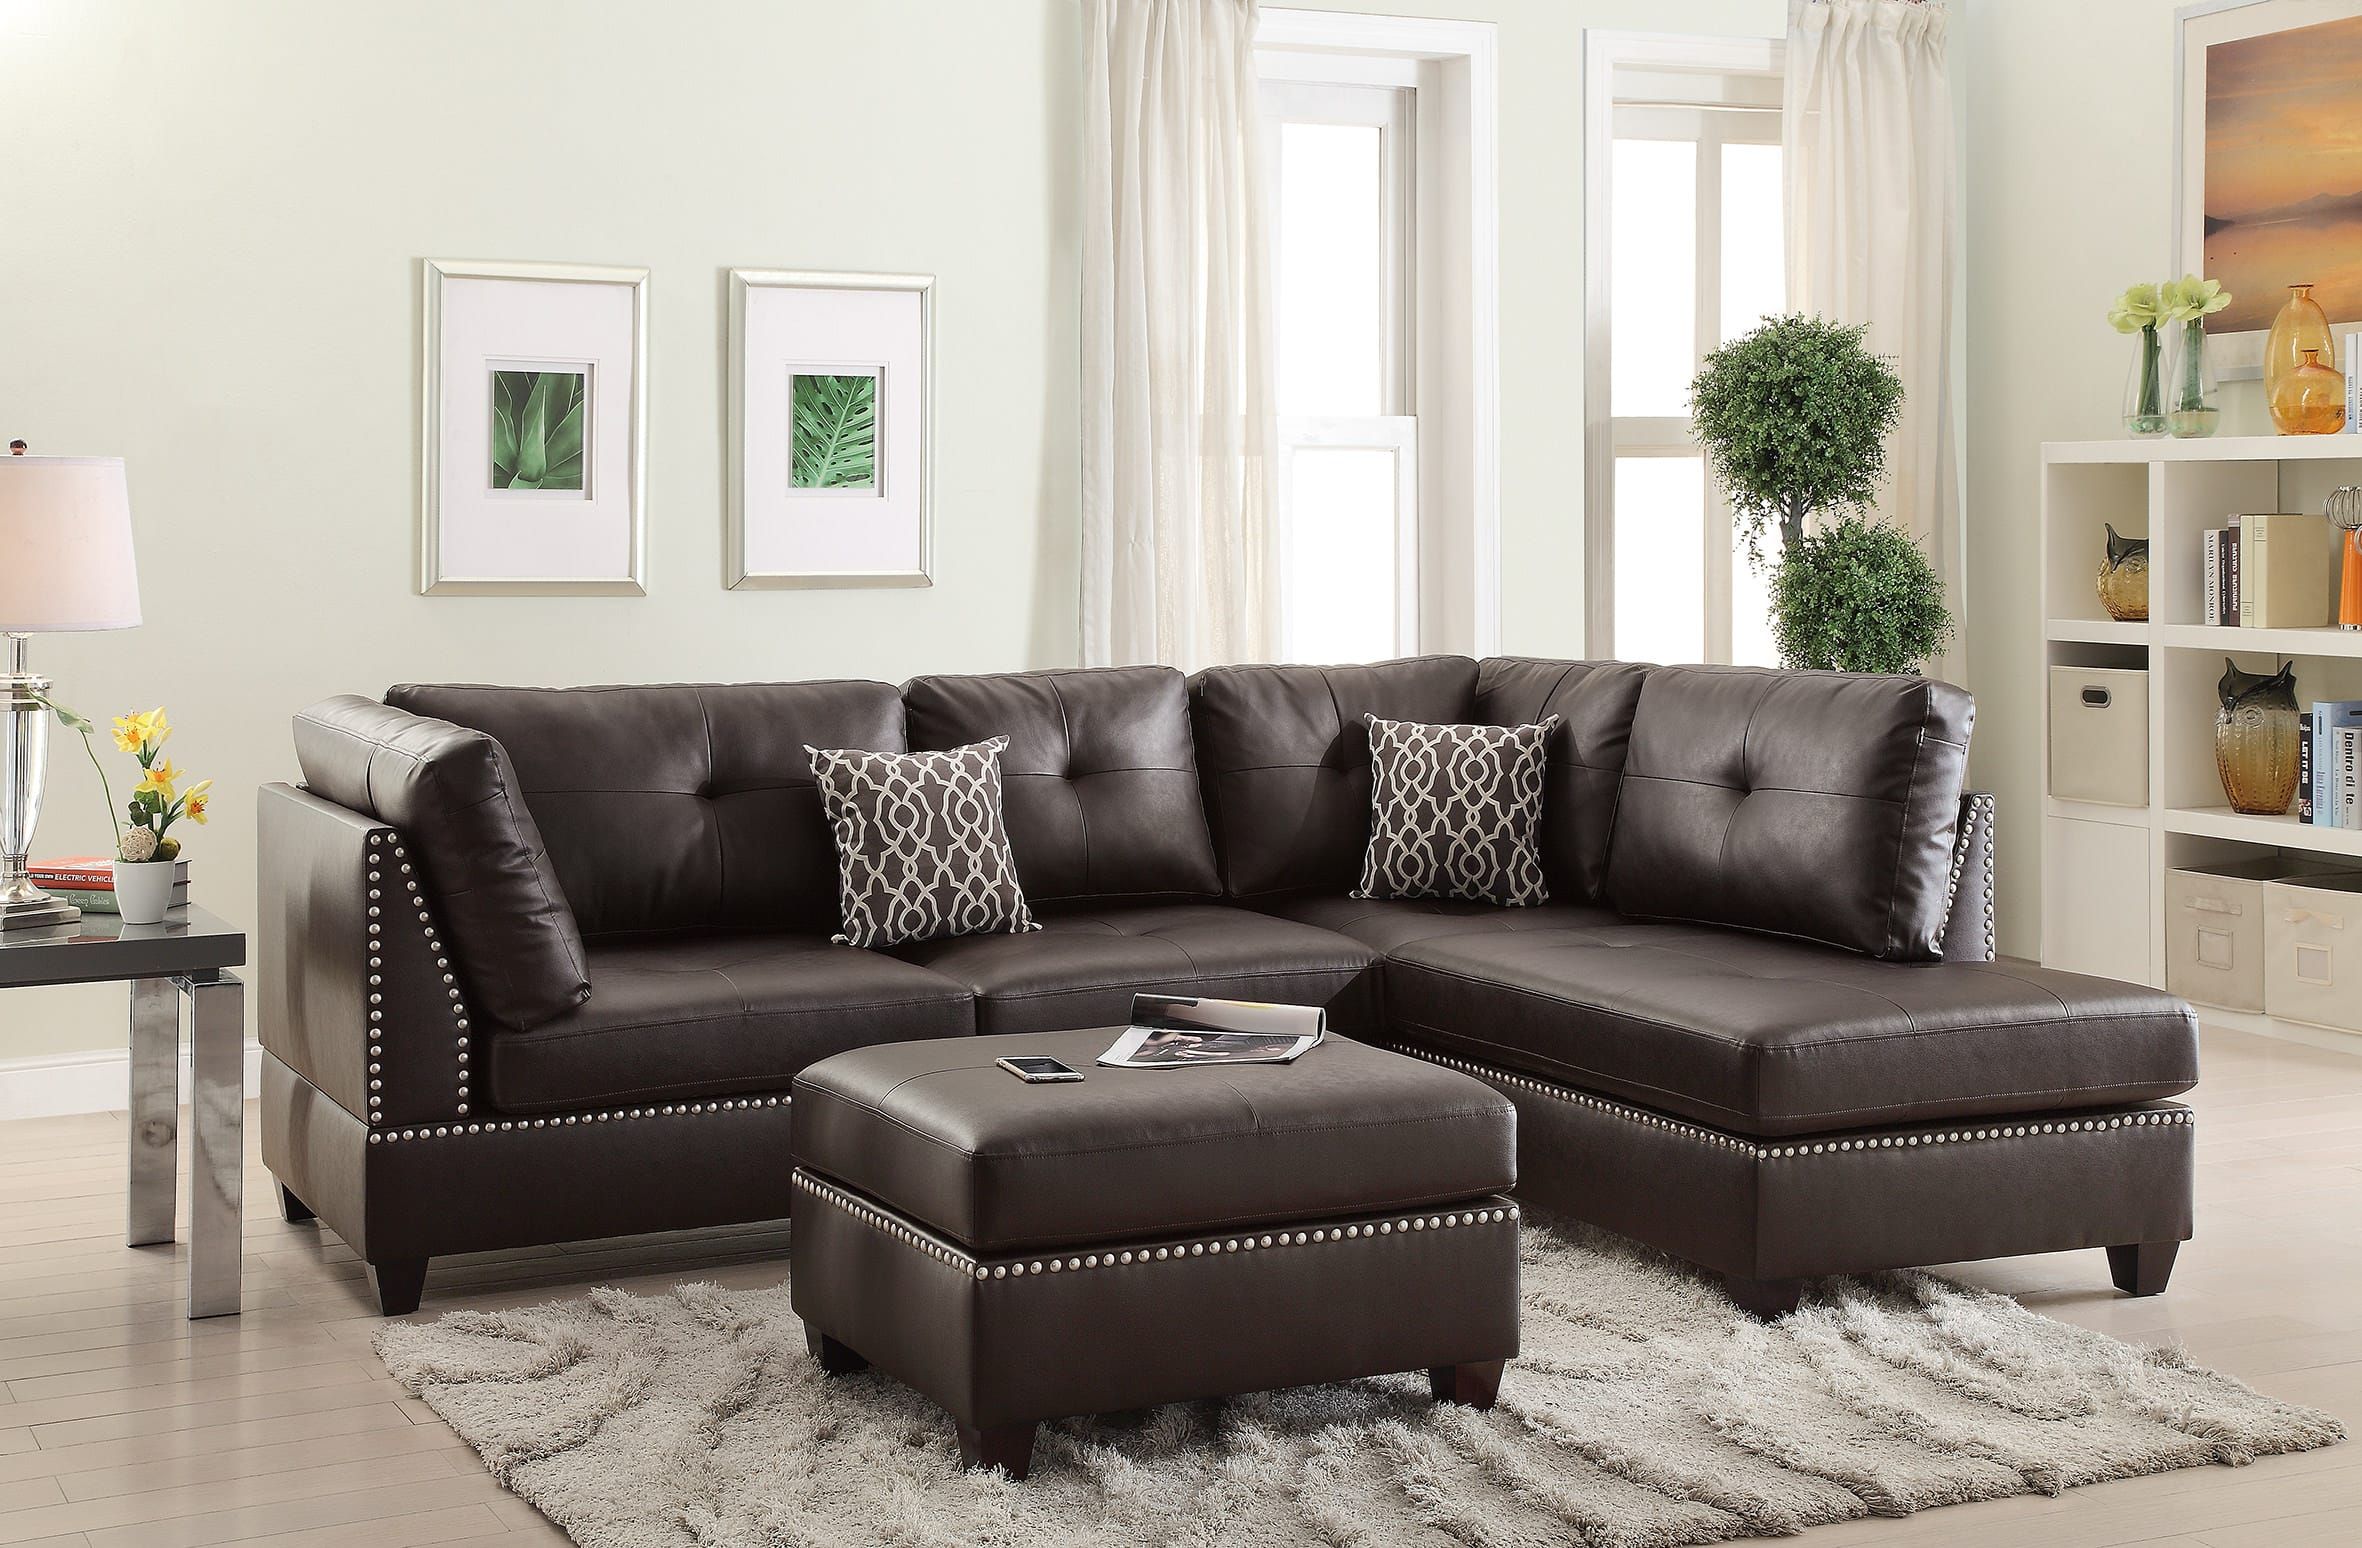 F6973 Espresso 3 Pcs Sectional Sofa Setpoundex Throughout 3 Piece Leather Sectional Sofa Sets (View 11 of 15)